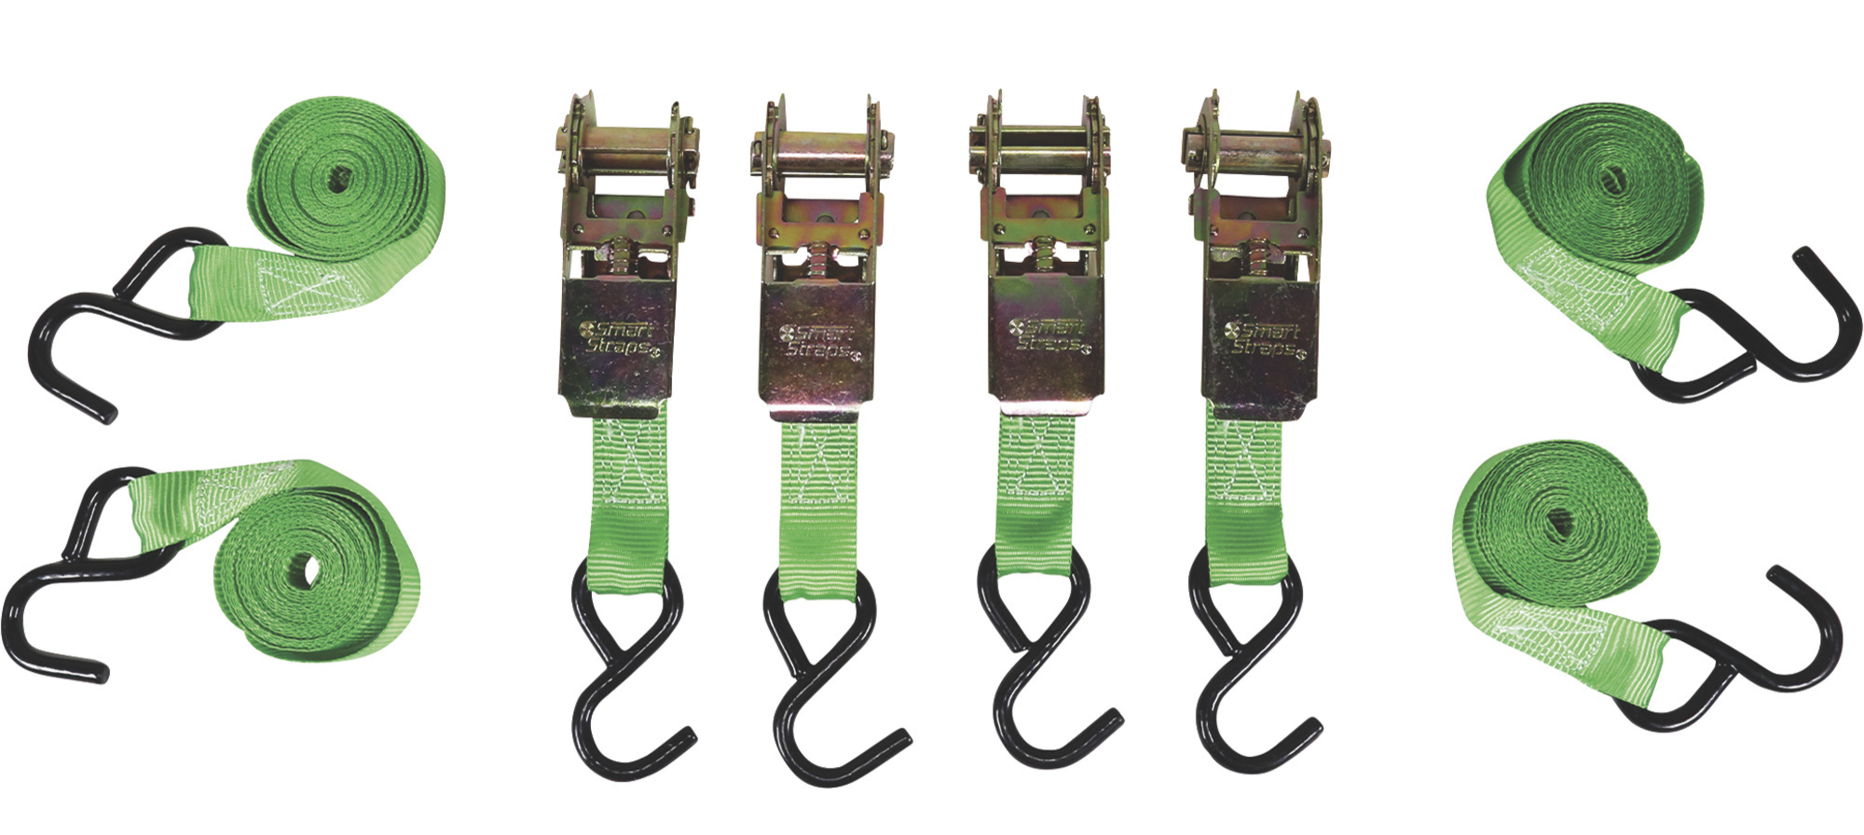 Northern Tool Stores: 4-Pack 1" x 14' SmartStraps Standard Ratchet Tie-Downs Free (valid through 5/29)